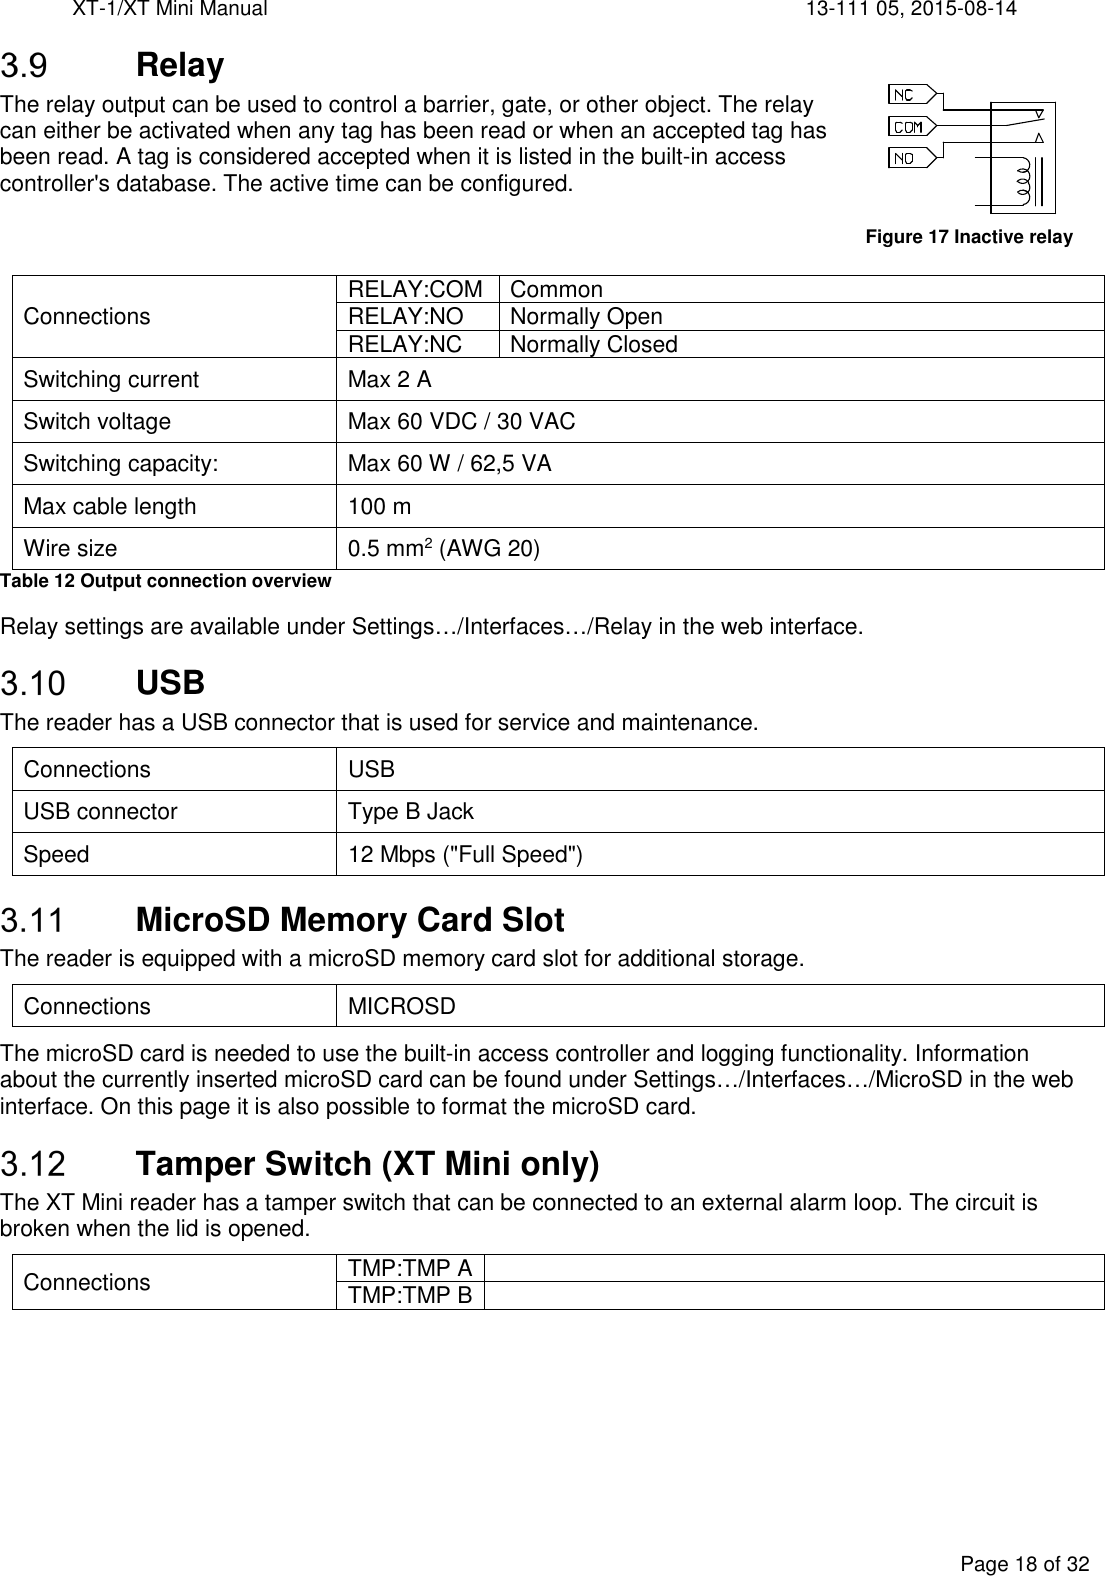 XT-1/XT Mini Manual     13-111 05, 2015-08-14  Page 18 of 32   Relay The relay output can be used to control a barrier, gate, or other object. The relay can either be activated when any tag has been read or when an accepted tag has been read. A tag is considered accepted when it is listed in the built-in access controller&apos;s database. The active time can be configured.    Connections  RELAY:COM  Common RELAY:NO  Normally Open RELAY:NC  Normally Closed Switching current  Max 2 A Switch voltage    Max 60 VDC / 30 VAC Switching capacity:  Max 60 W / 62,5 VA Max cable length  100 m Wire size  0.5 mm2 (AWG 20) Table 12 Output connection overview Relay settings are available under Settings…/Interfaces…/Relay in the web interface.  USB The reader has a USB connector that is used for service and maintenance. Connections  USB USB connector  Type B Jack Speed  12 Mbps (&quot;Full Speed&quot;)  MicroSD Memory Card Slot The reader is equipped with a microSD memory card slot for additional storage. Connections  MICROSD The microSD card is needed to use the built-in access controller and logging functionality. Information about the currently inserted microSD card can be found under Settings…/Interfaces…/MicroSD in the web interface. On this page it is also possible to format the microSD card.  Tamper Switch (XT Mini only) The XT Mini reader has a tamper switch that can be connected to an external alarm loop. The circuit is broken when the lid is opened. Connections  TMP:TMP A  TMP:TMP B      Figure 17 Inactive relay 